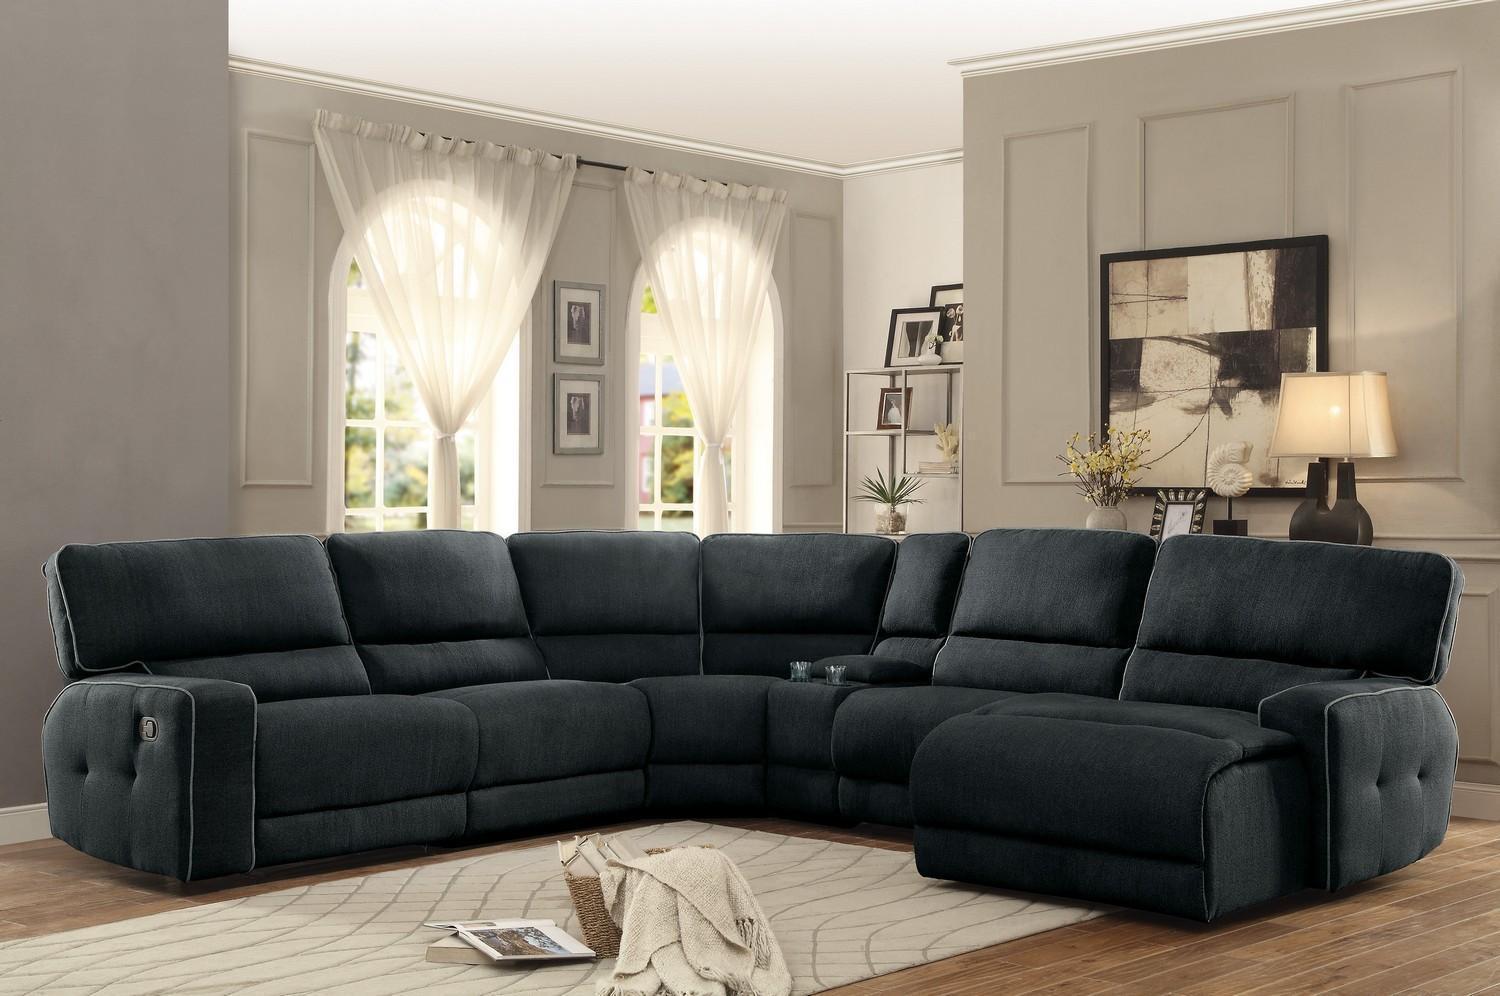 Contemporary Reclining Sectional Keamey 8336-Sectional Sofa Chaise-RHC in Dark Gray Polyester